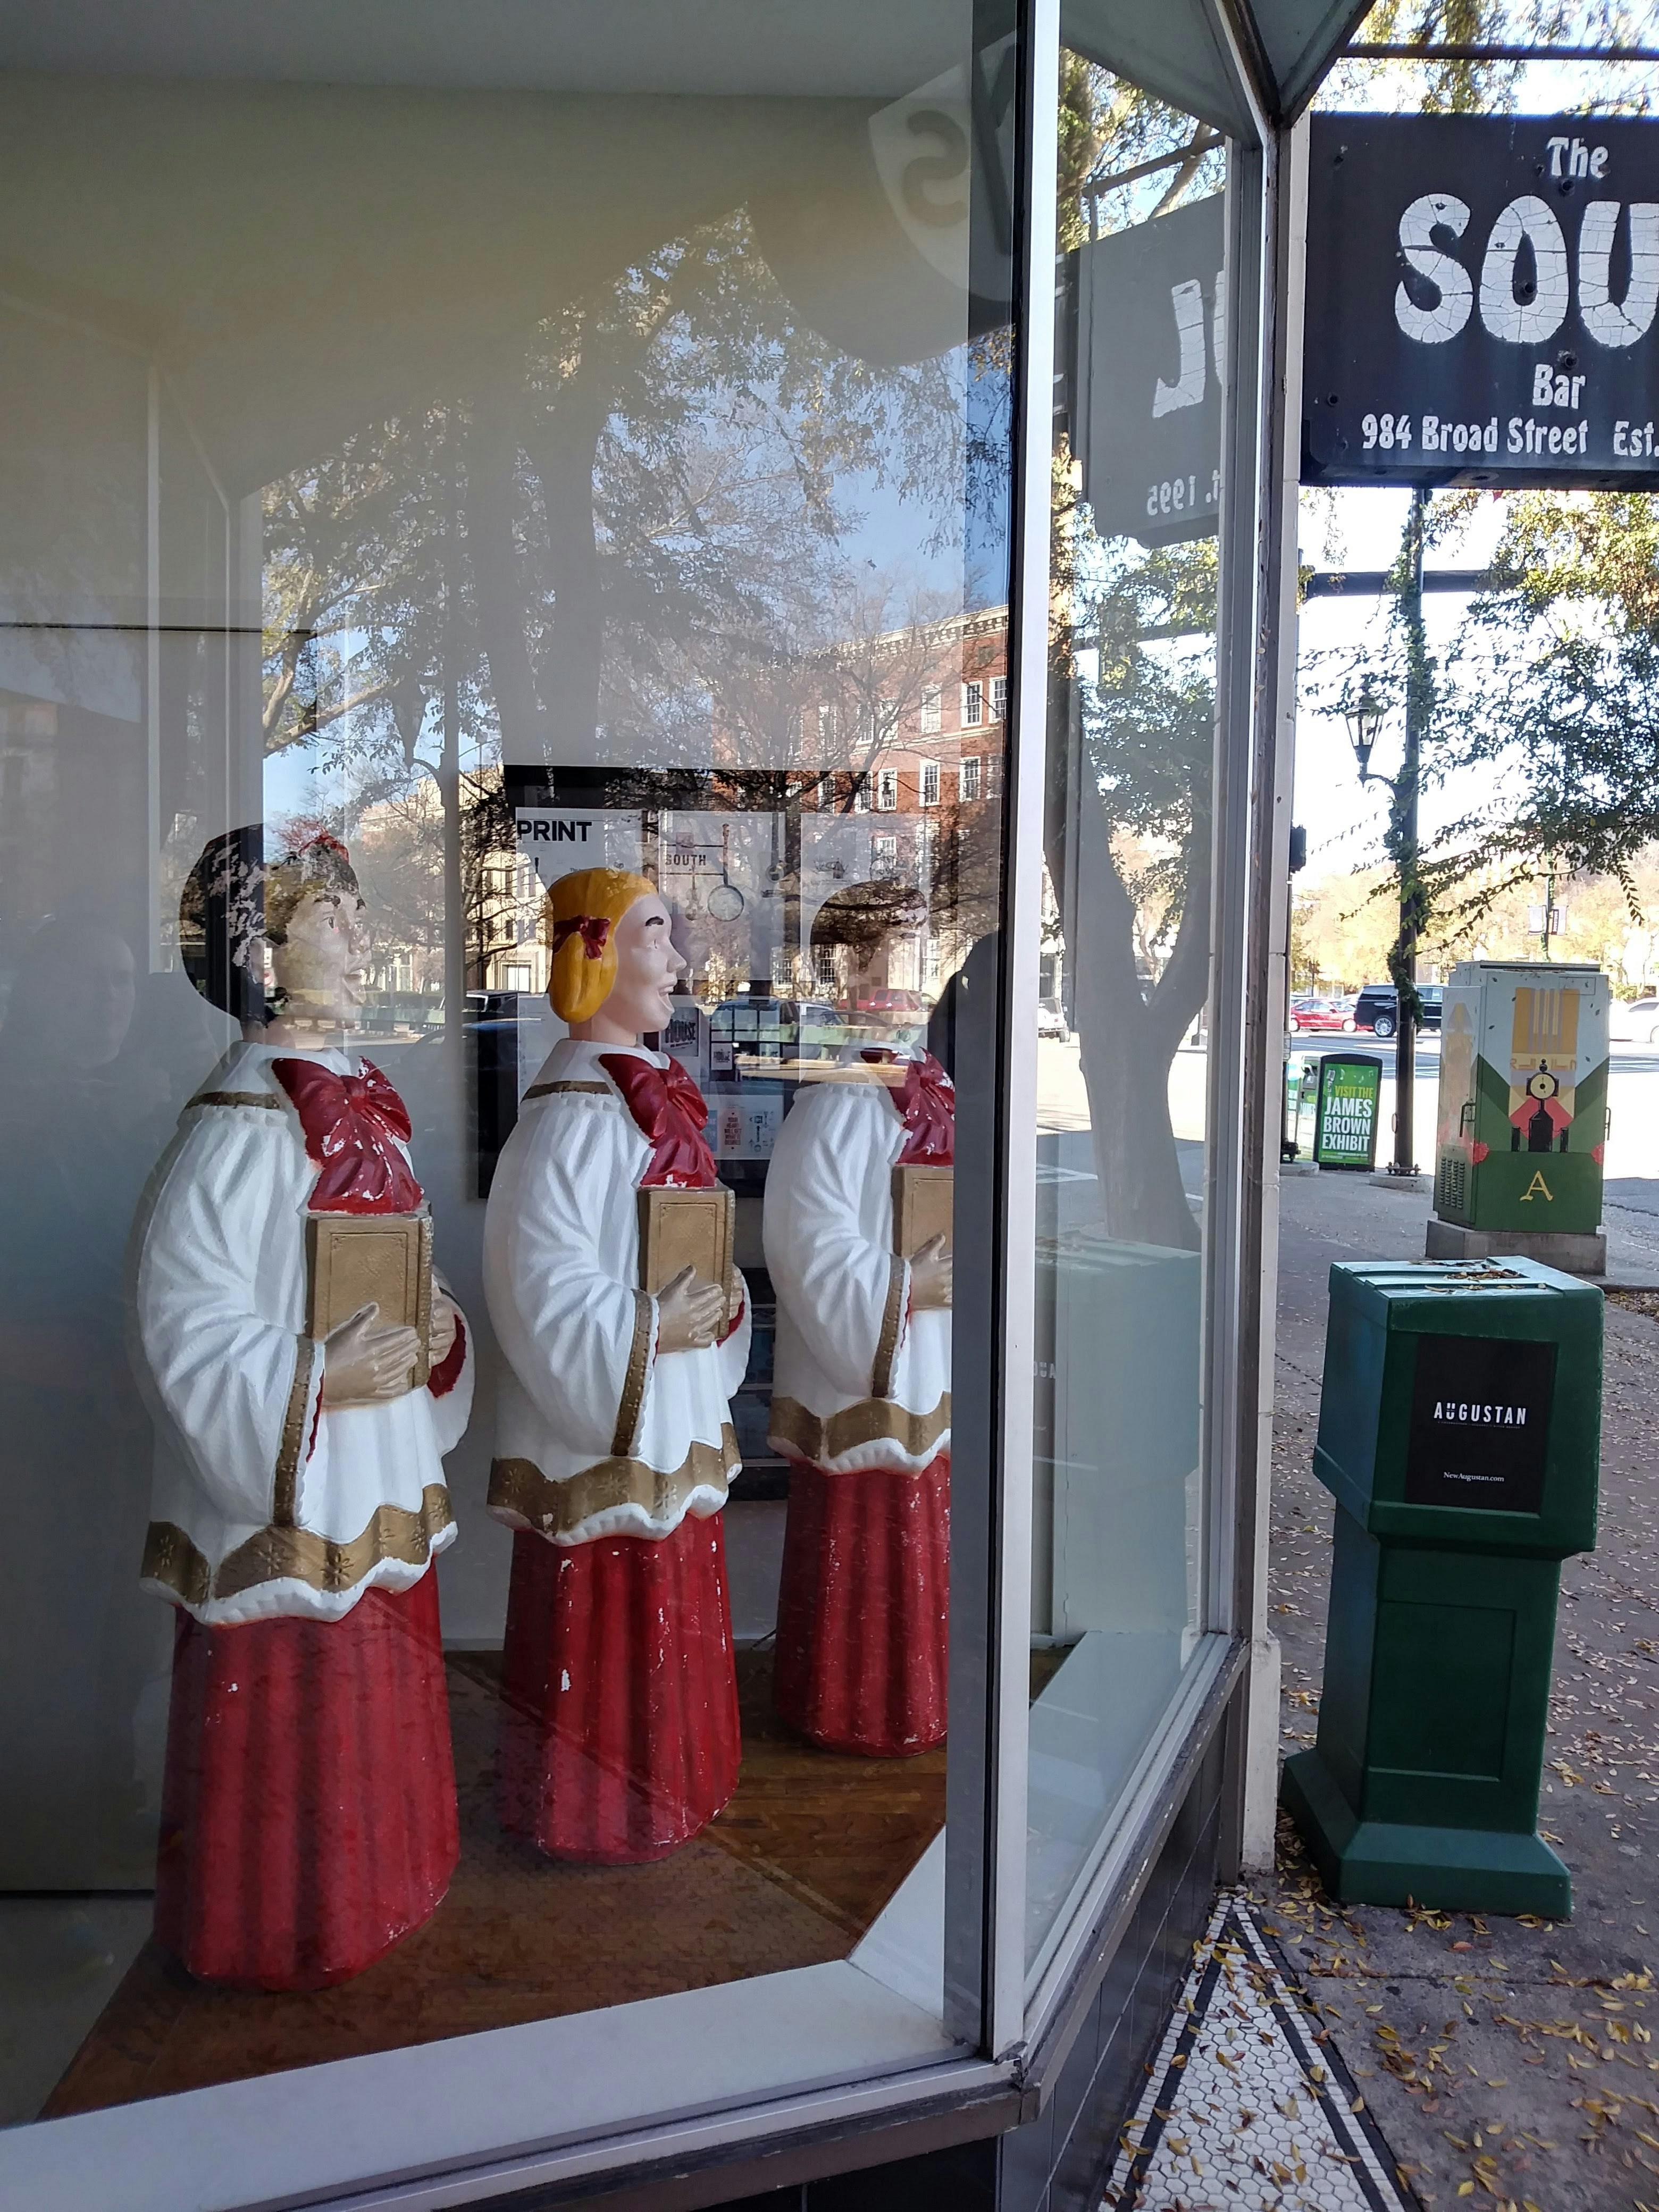 Broad street Augusta Georgia with blow mold carolers in a store window and windows reflecting street scene